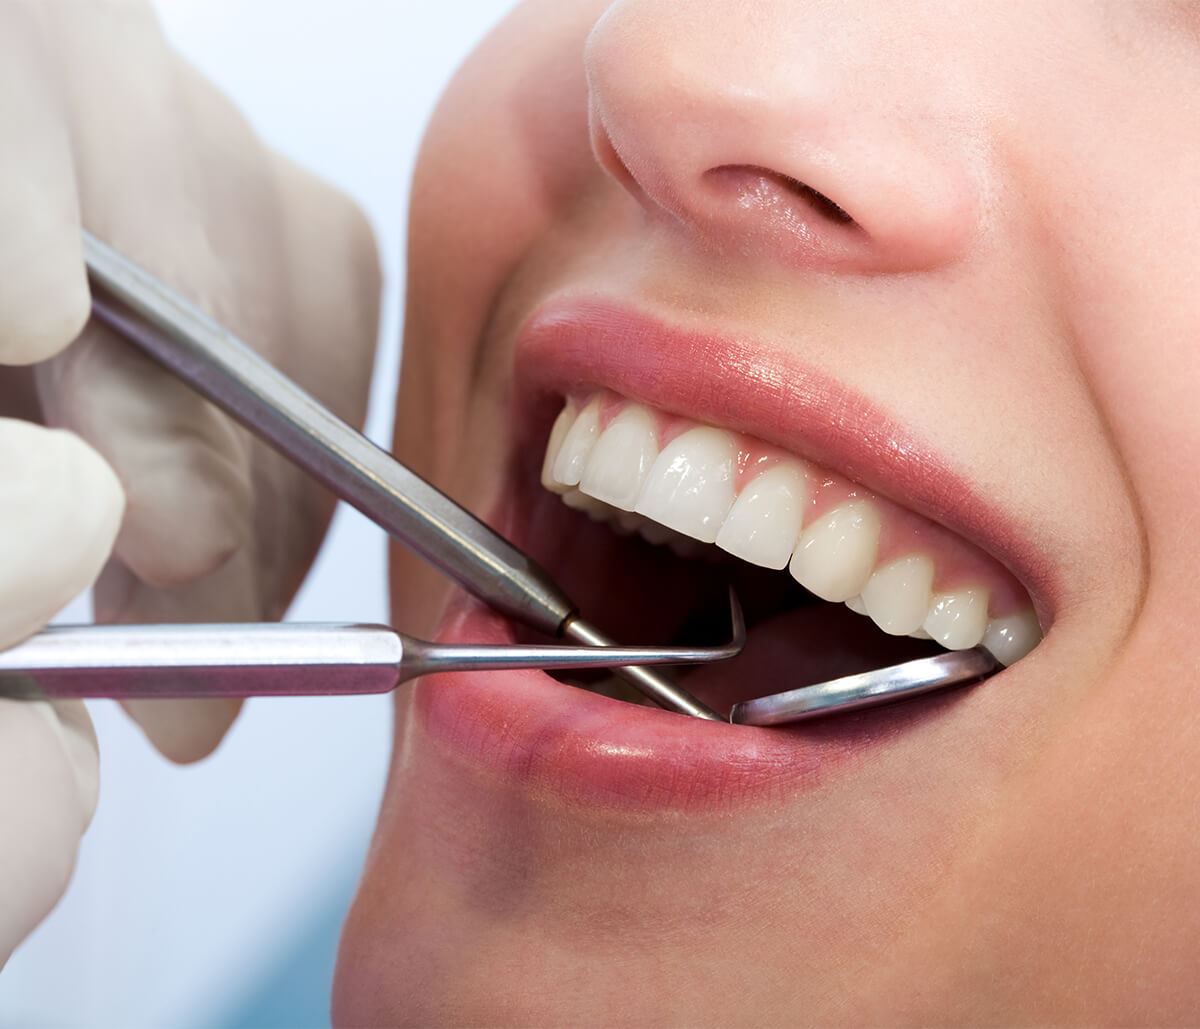 How to Find a Holistic Dentist in Cary NC Area